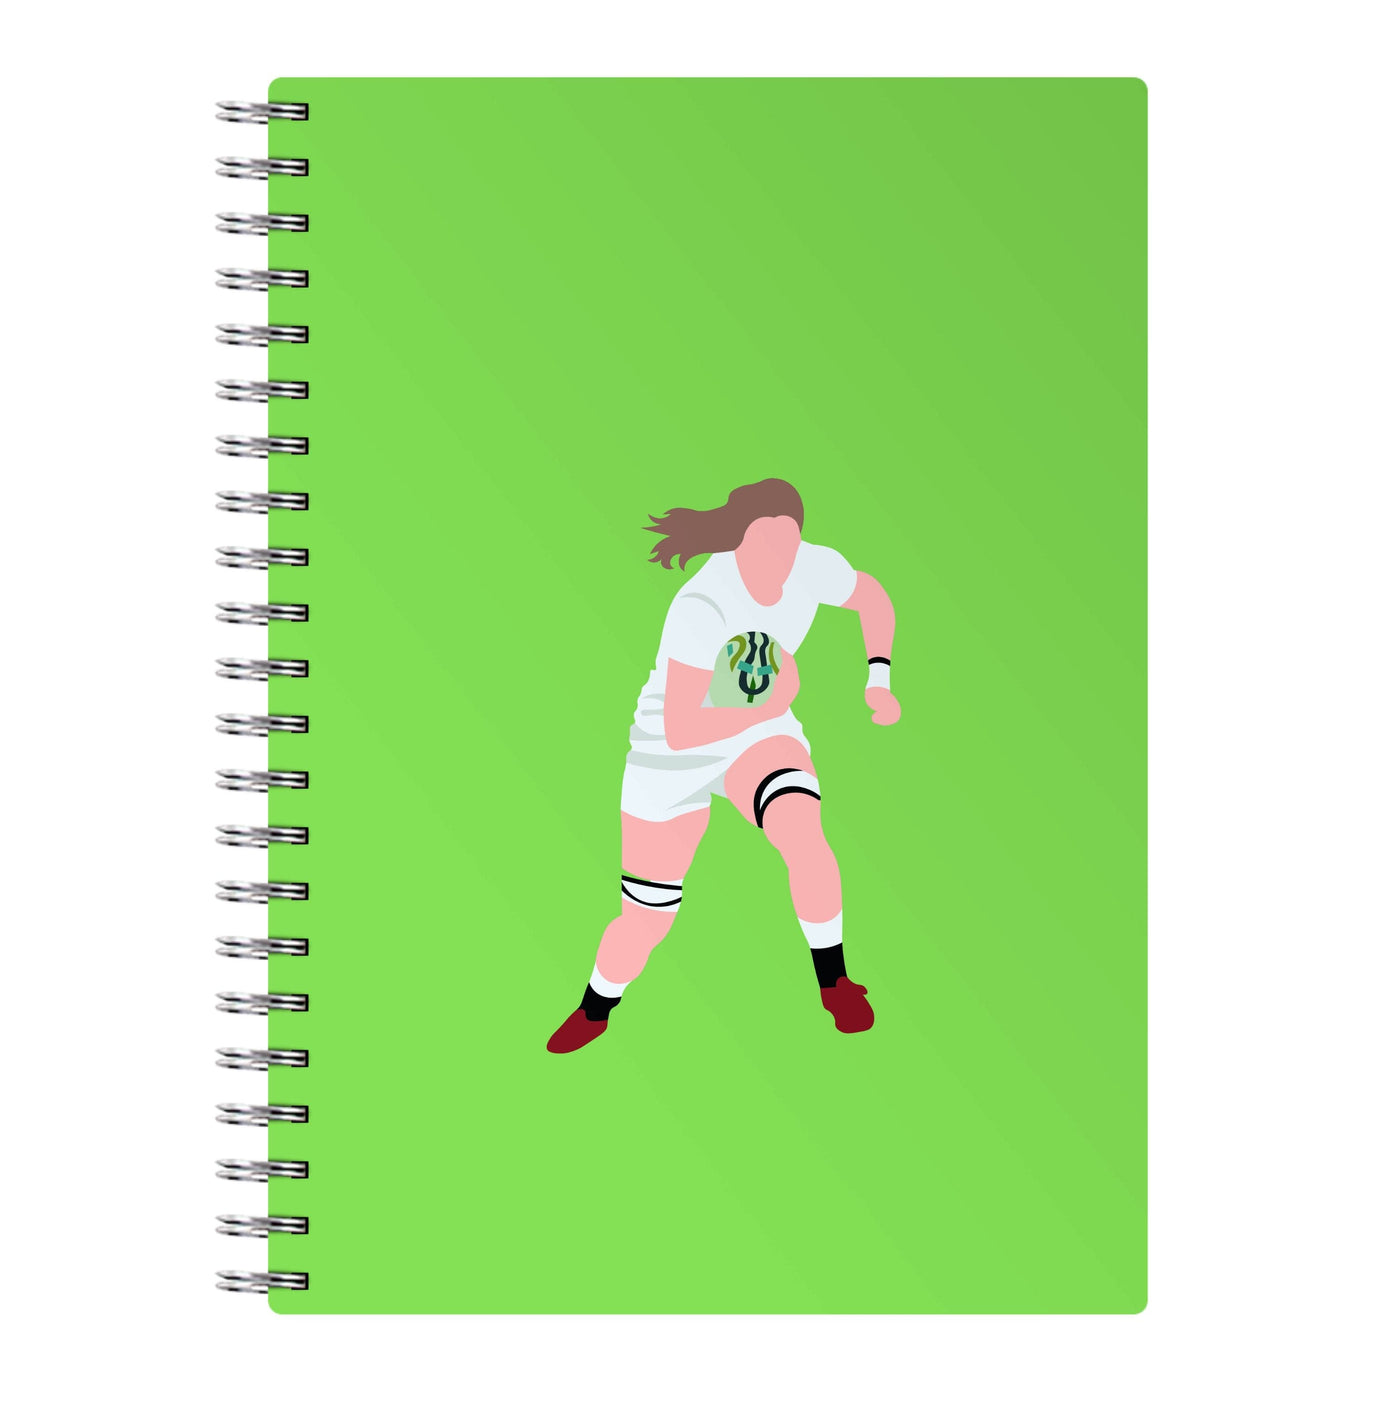 Sprint - Rugby  Notebook